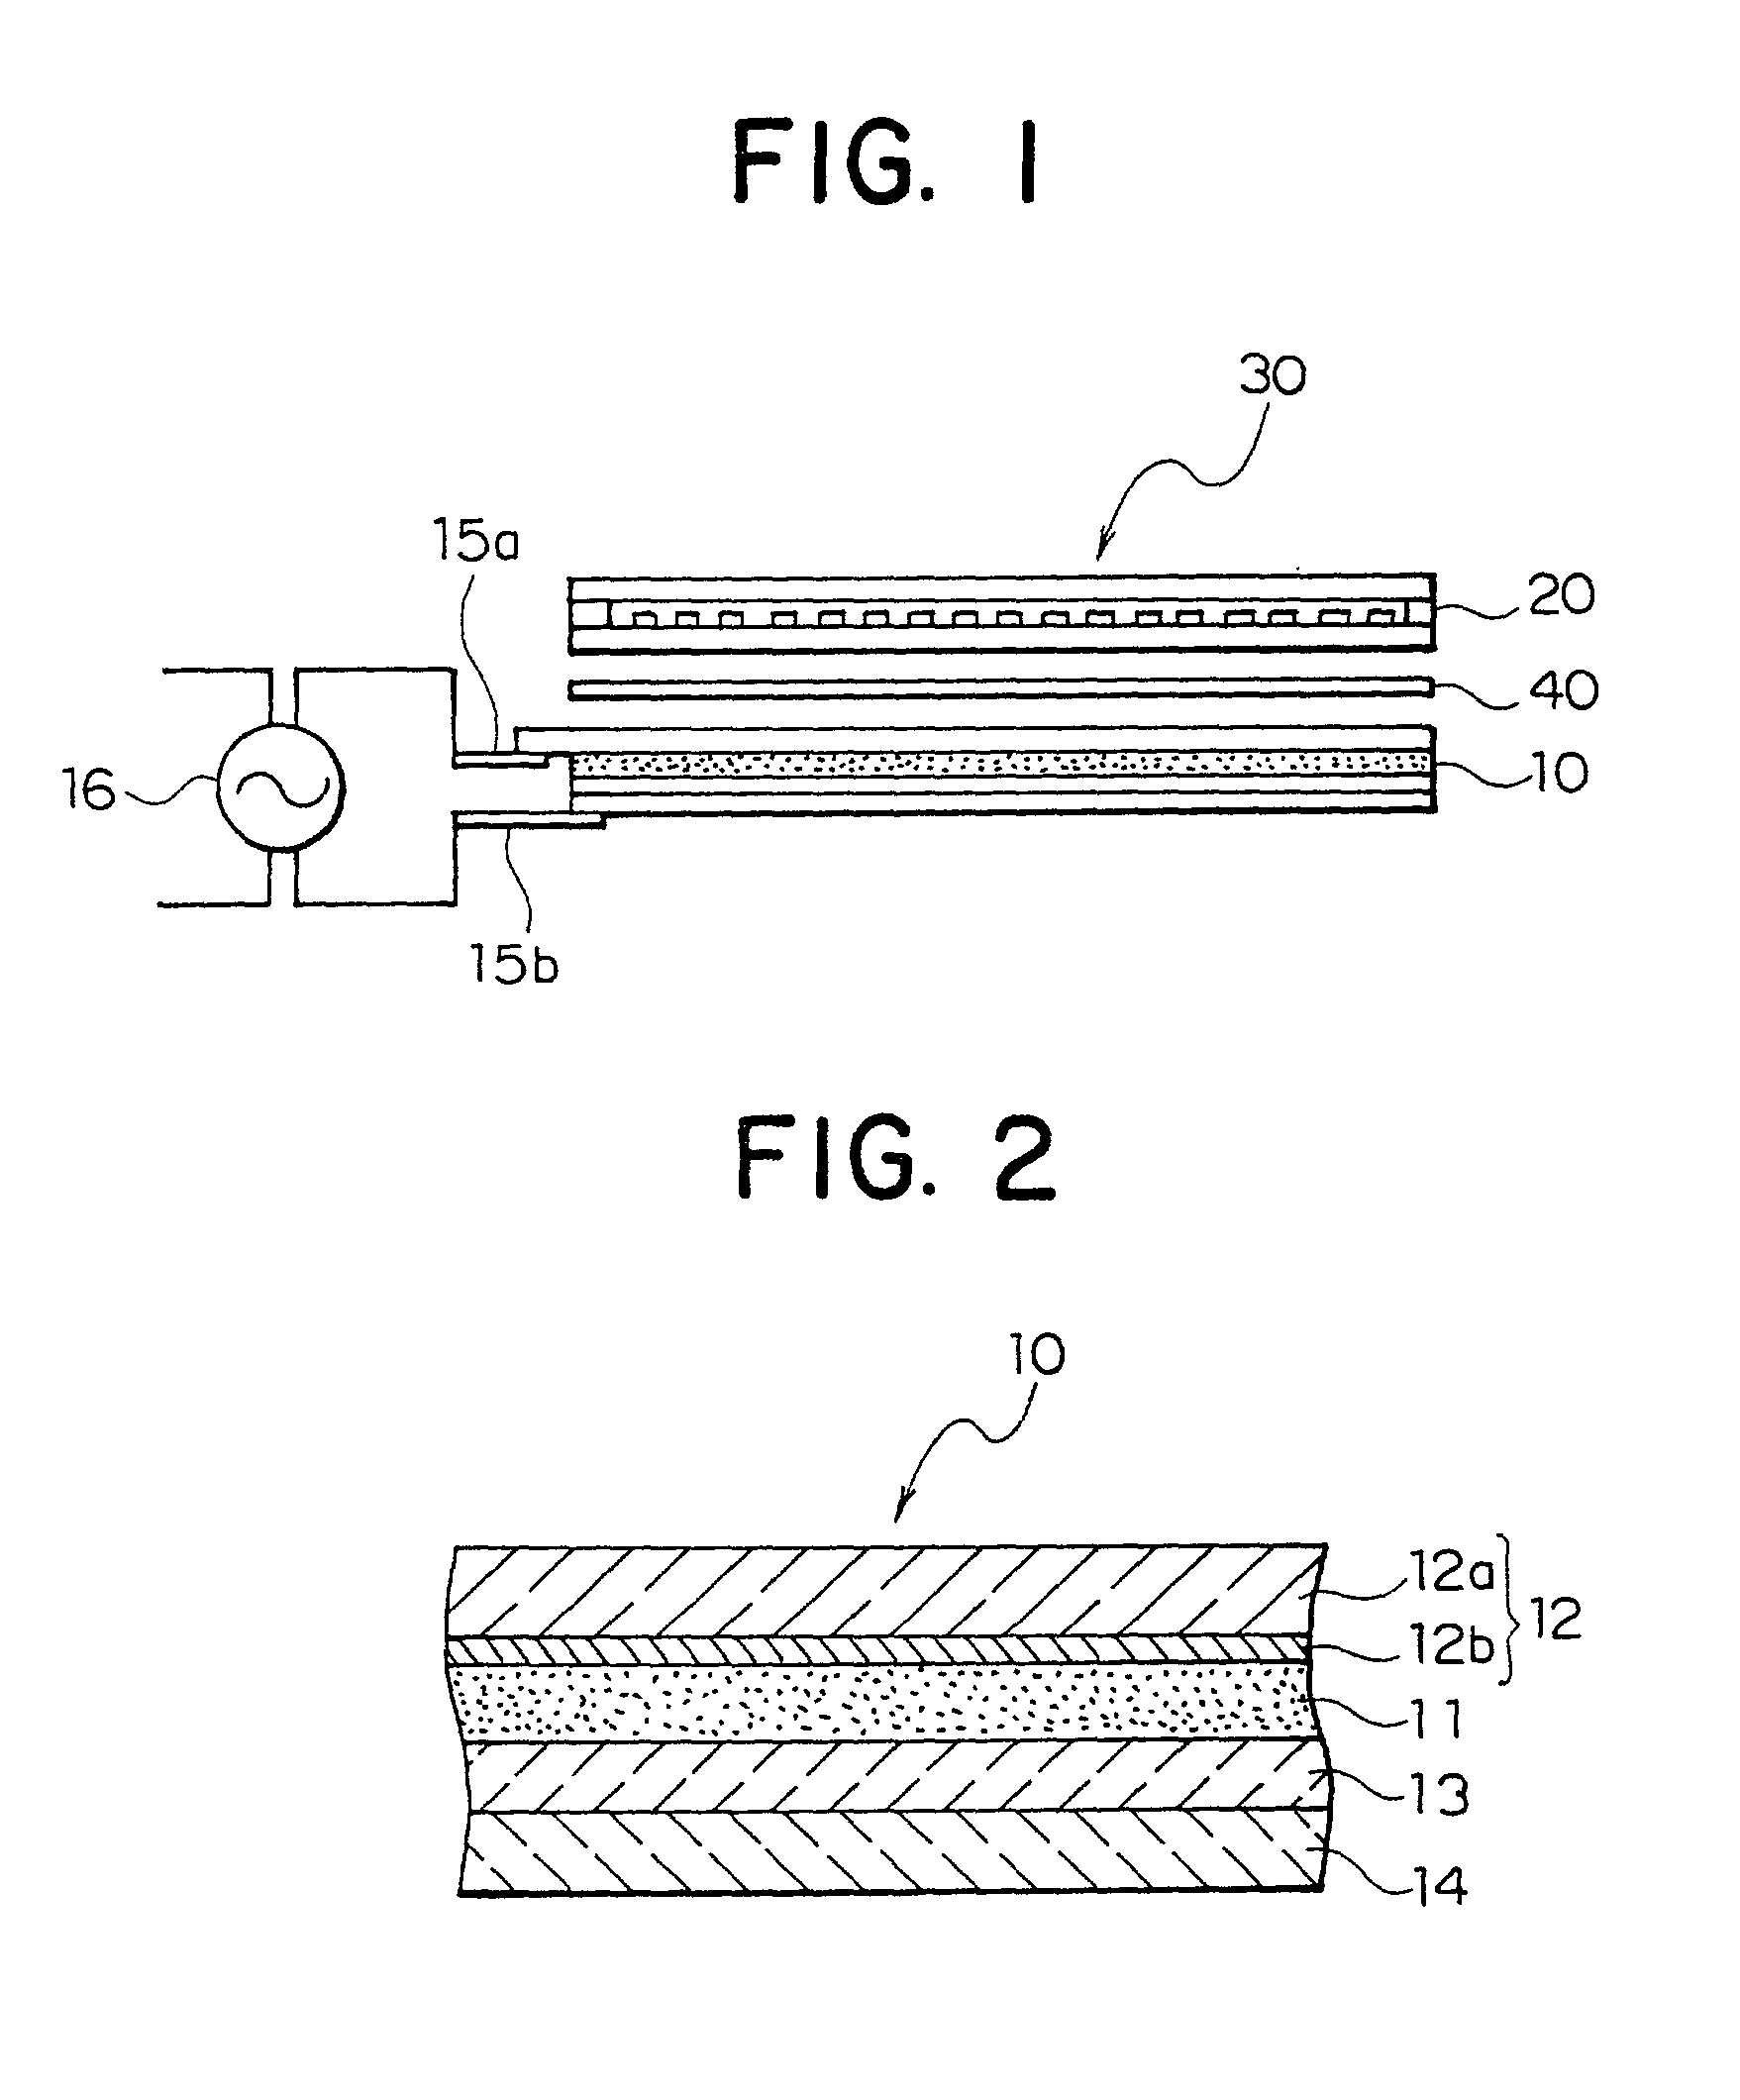 Backlight for color liquid crystal, color liquid crystal display device, and EL element for backlight of color liquid crystal device